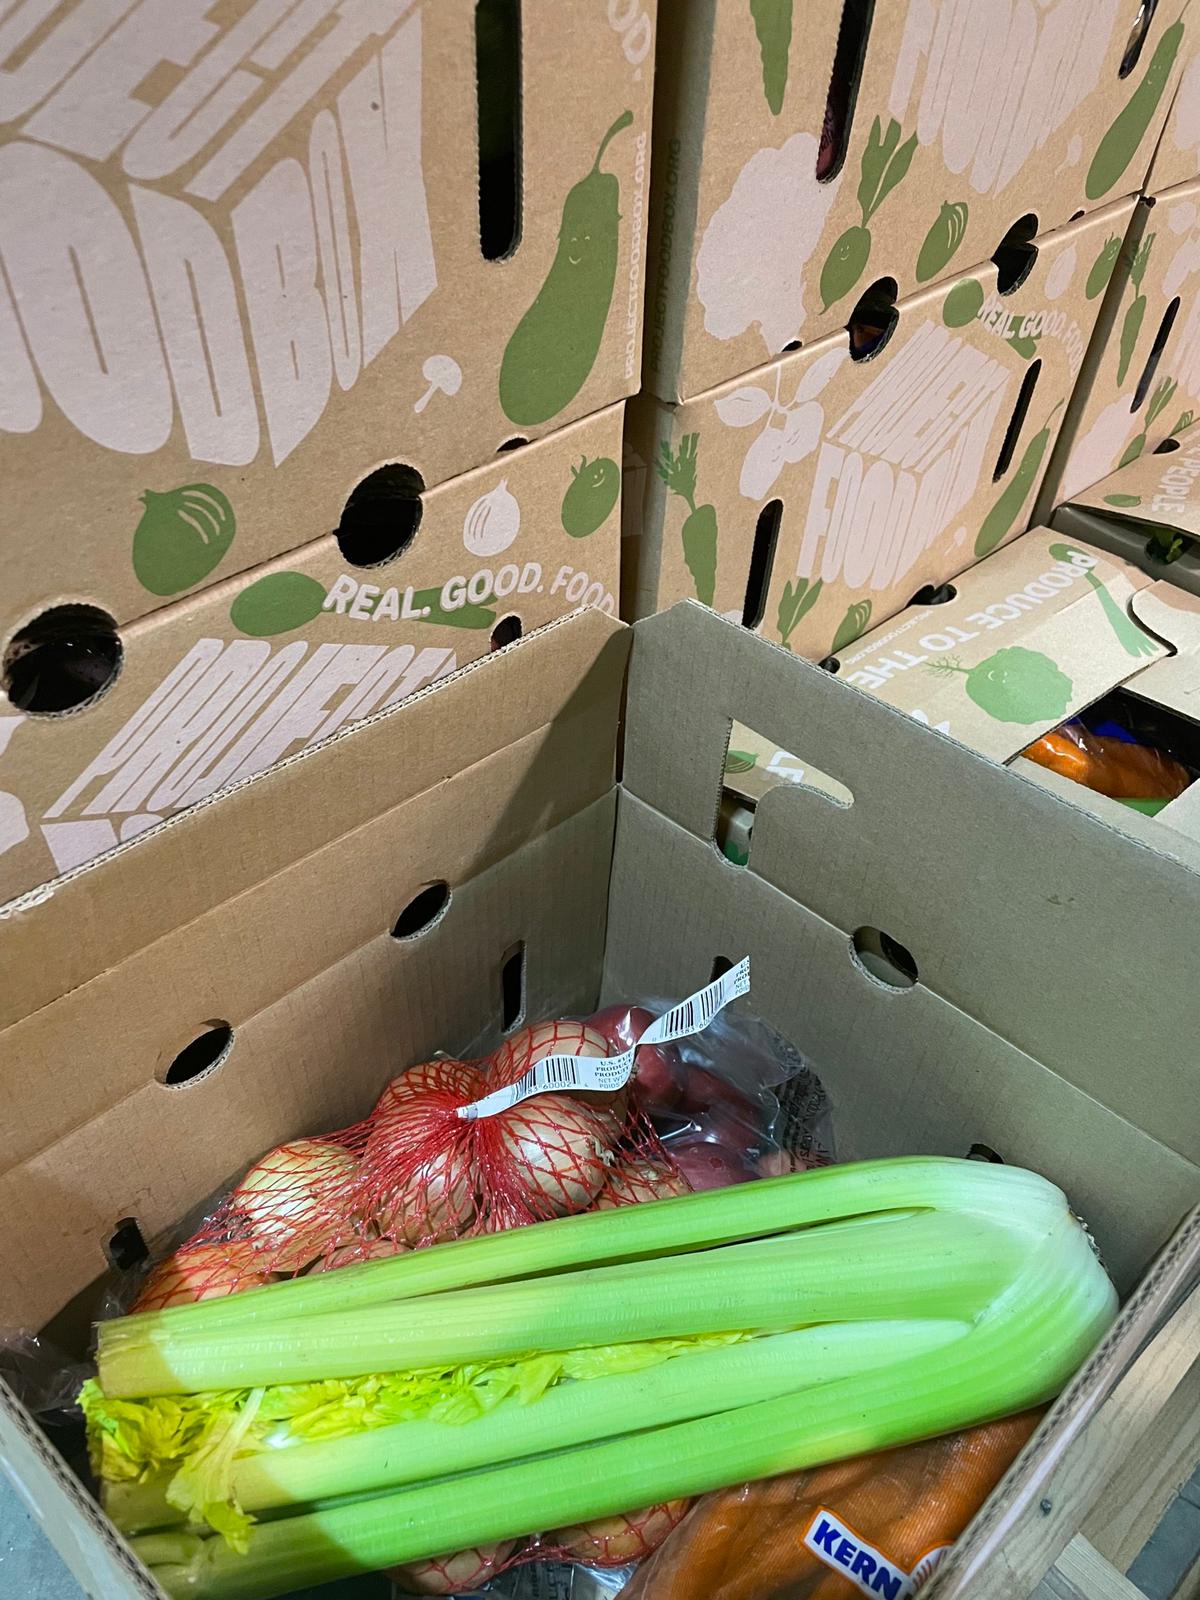 Grocery Box Delivery – Project Food Box